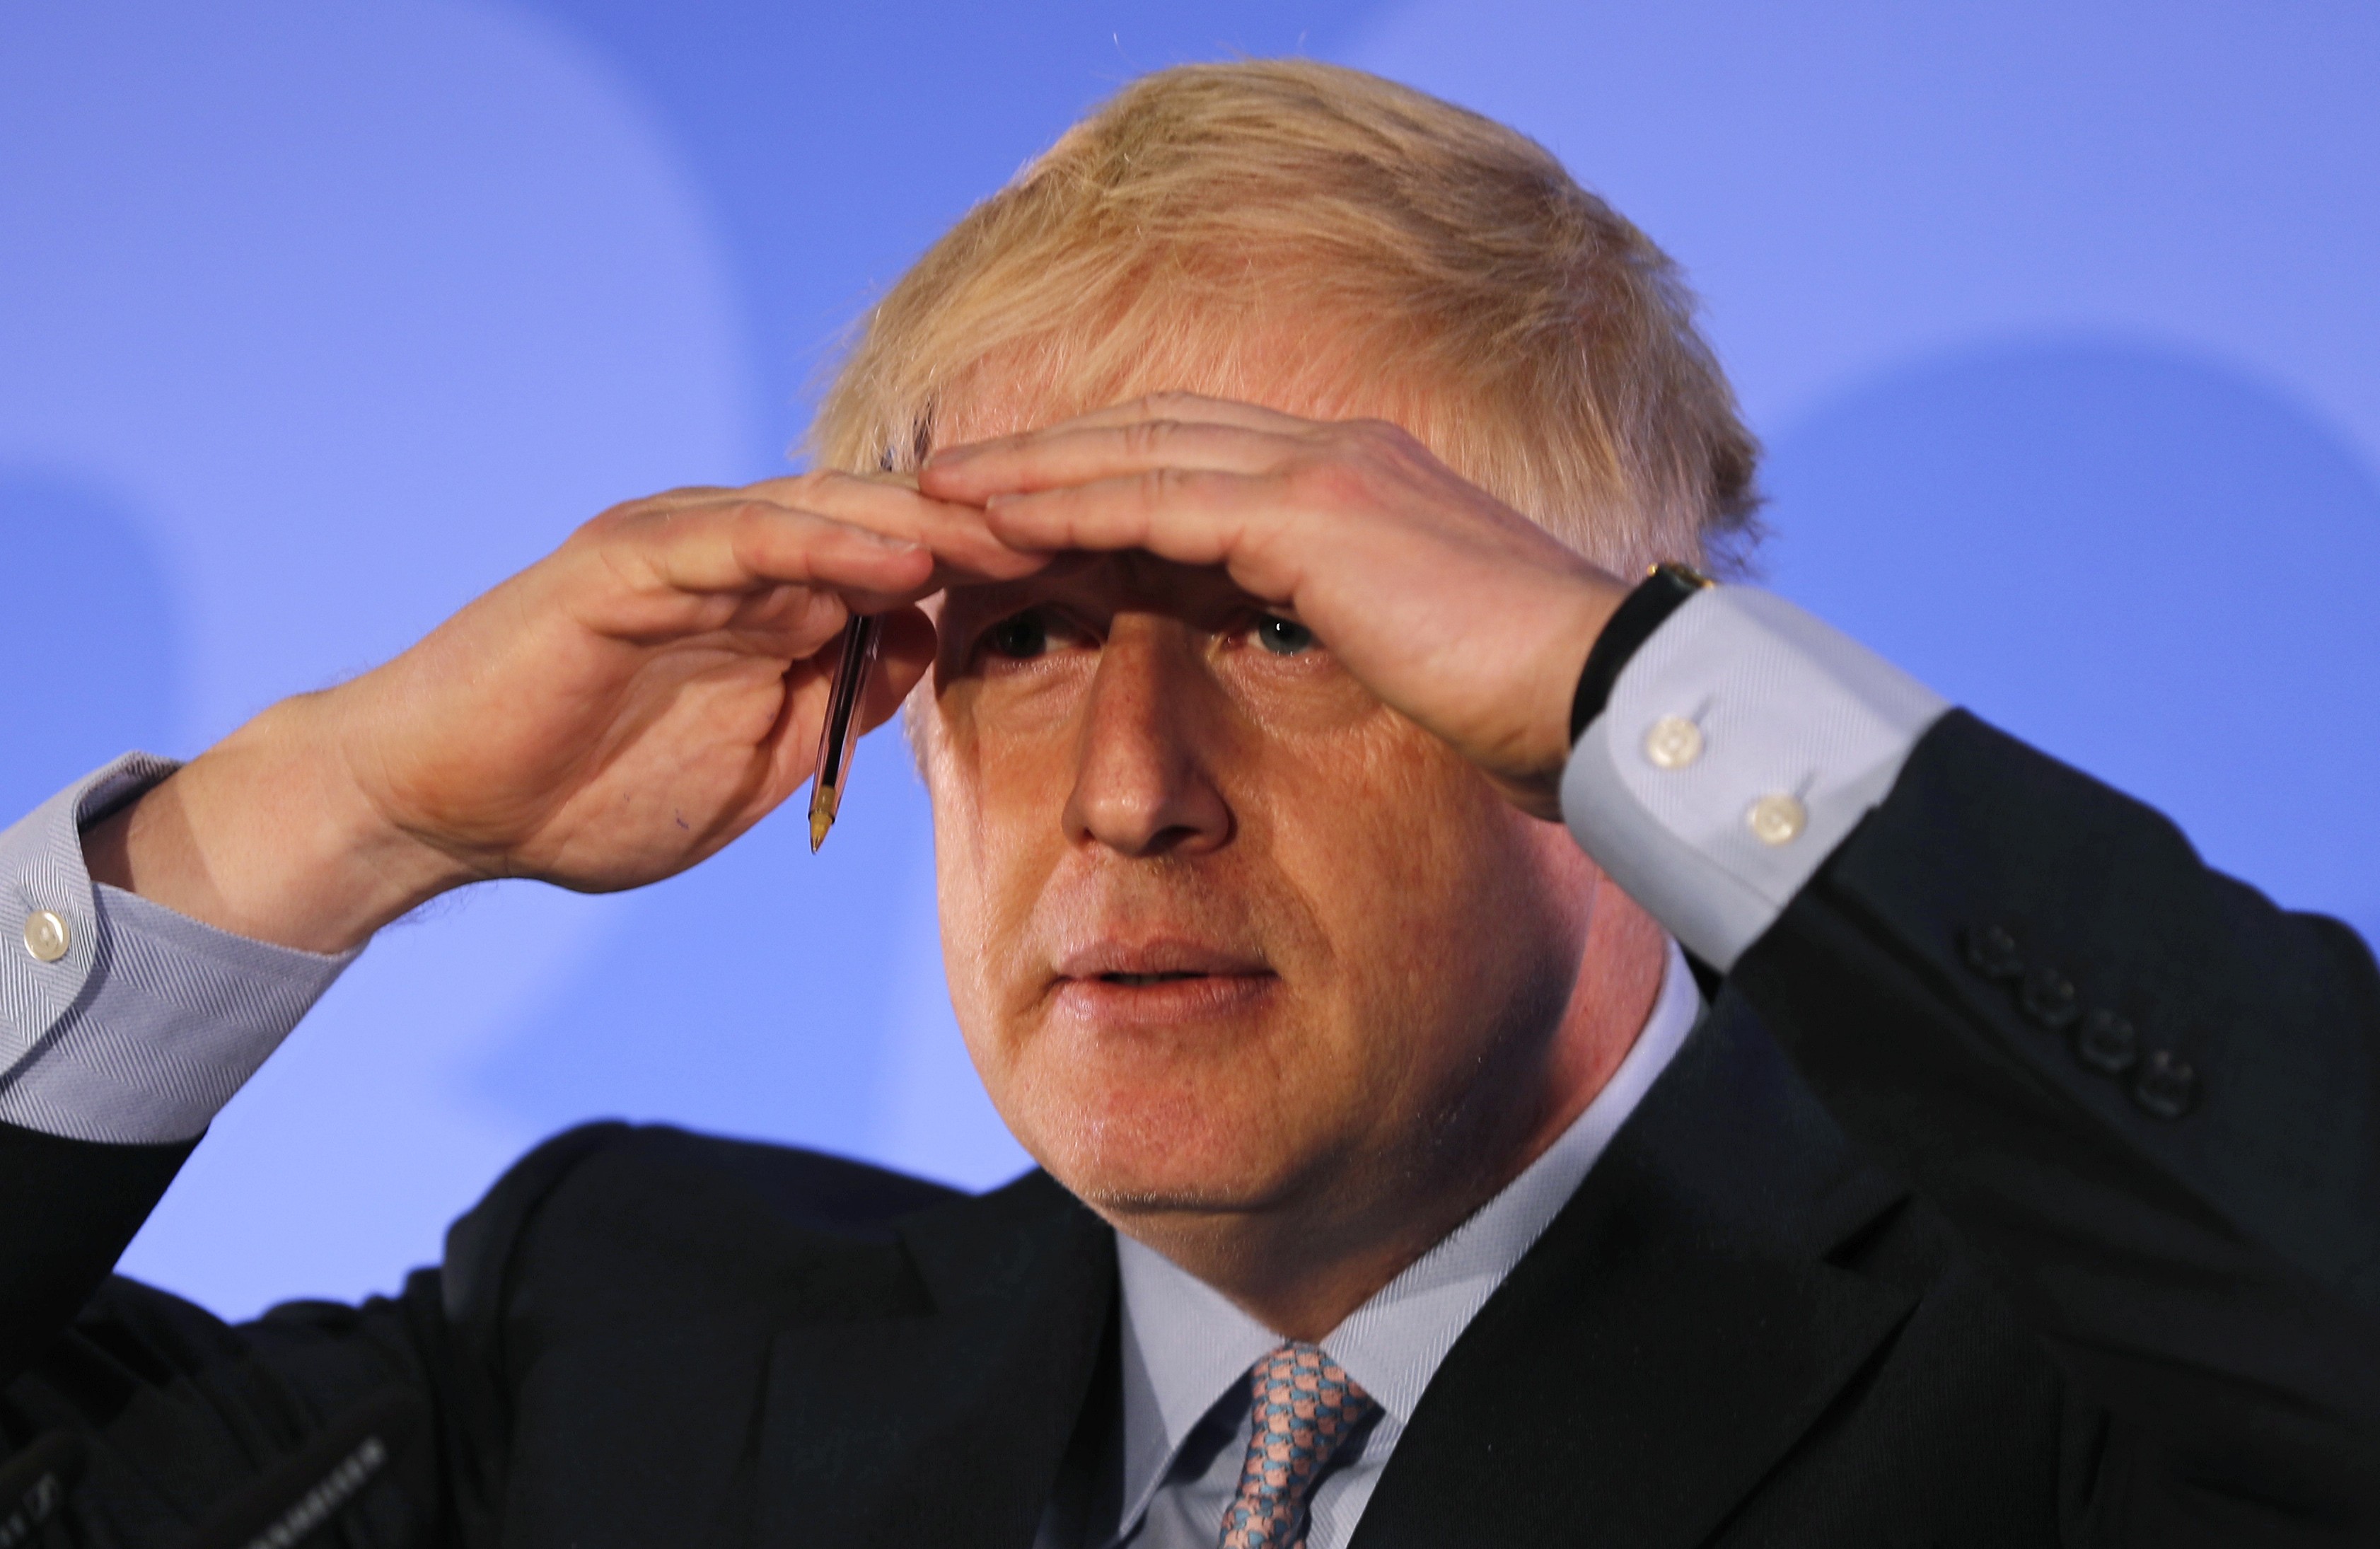 Whatever lies ahead for Britain and its economy, the likely prime minister in waiting, Boris Johnson, is determined to take the nation out of the EU on October 31. Photo: AP